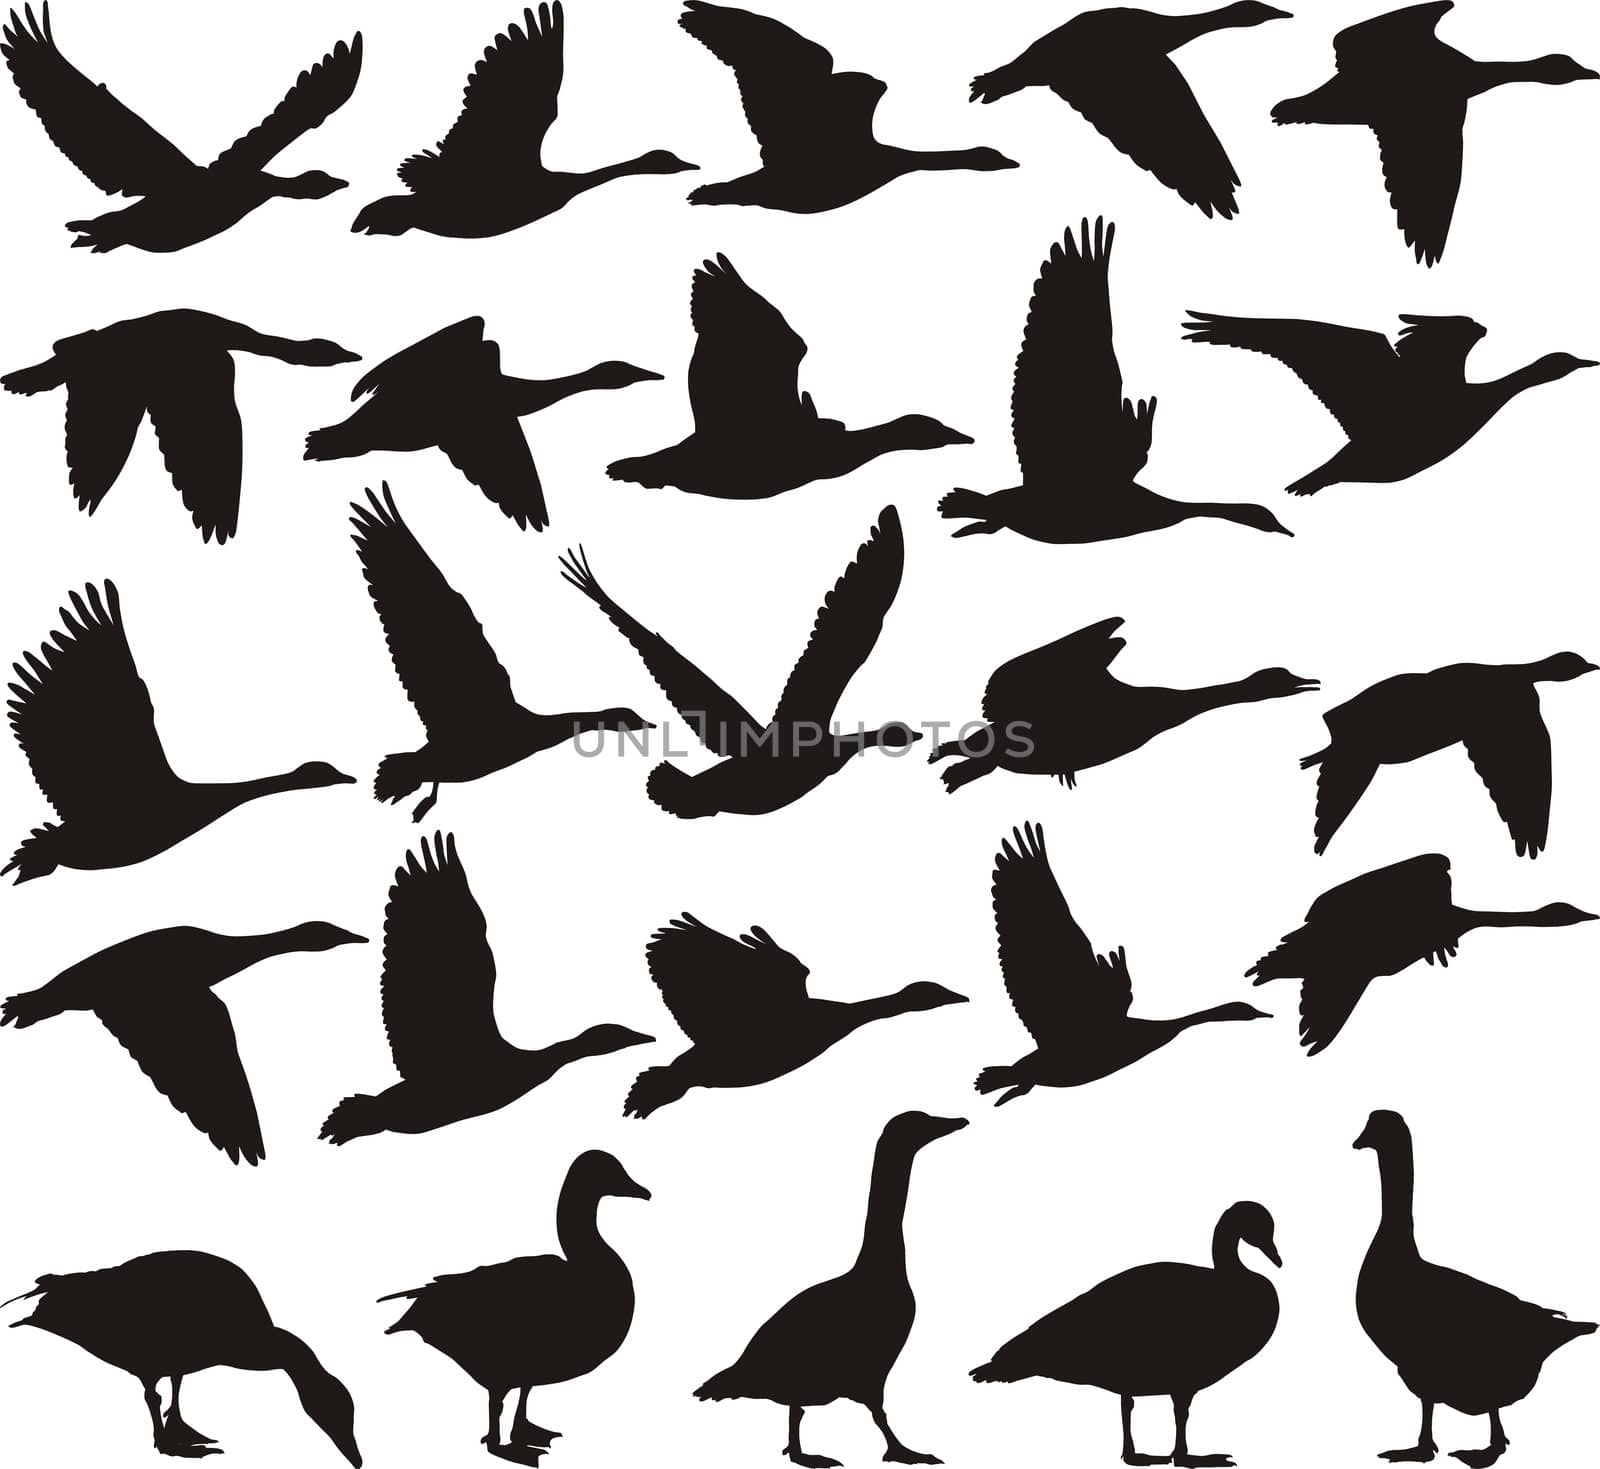 Silhouette geese, black and white vector illustration